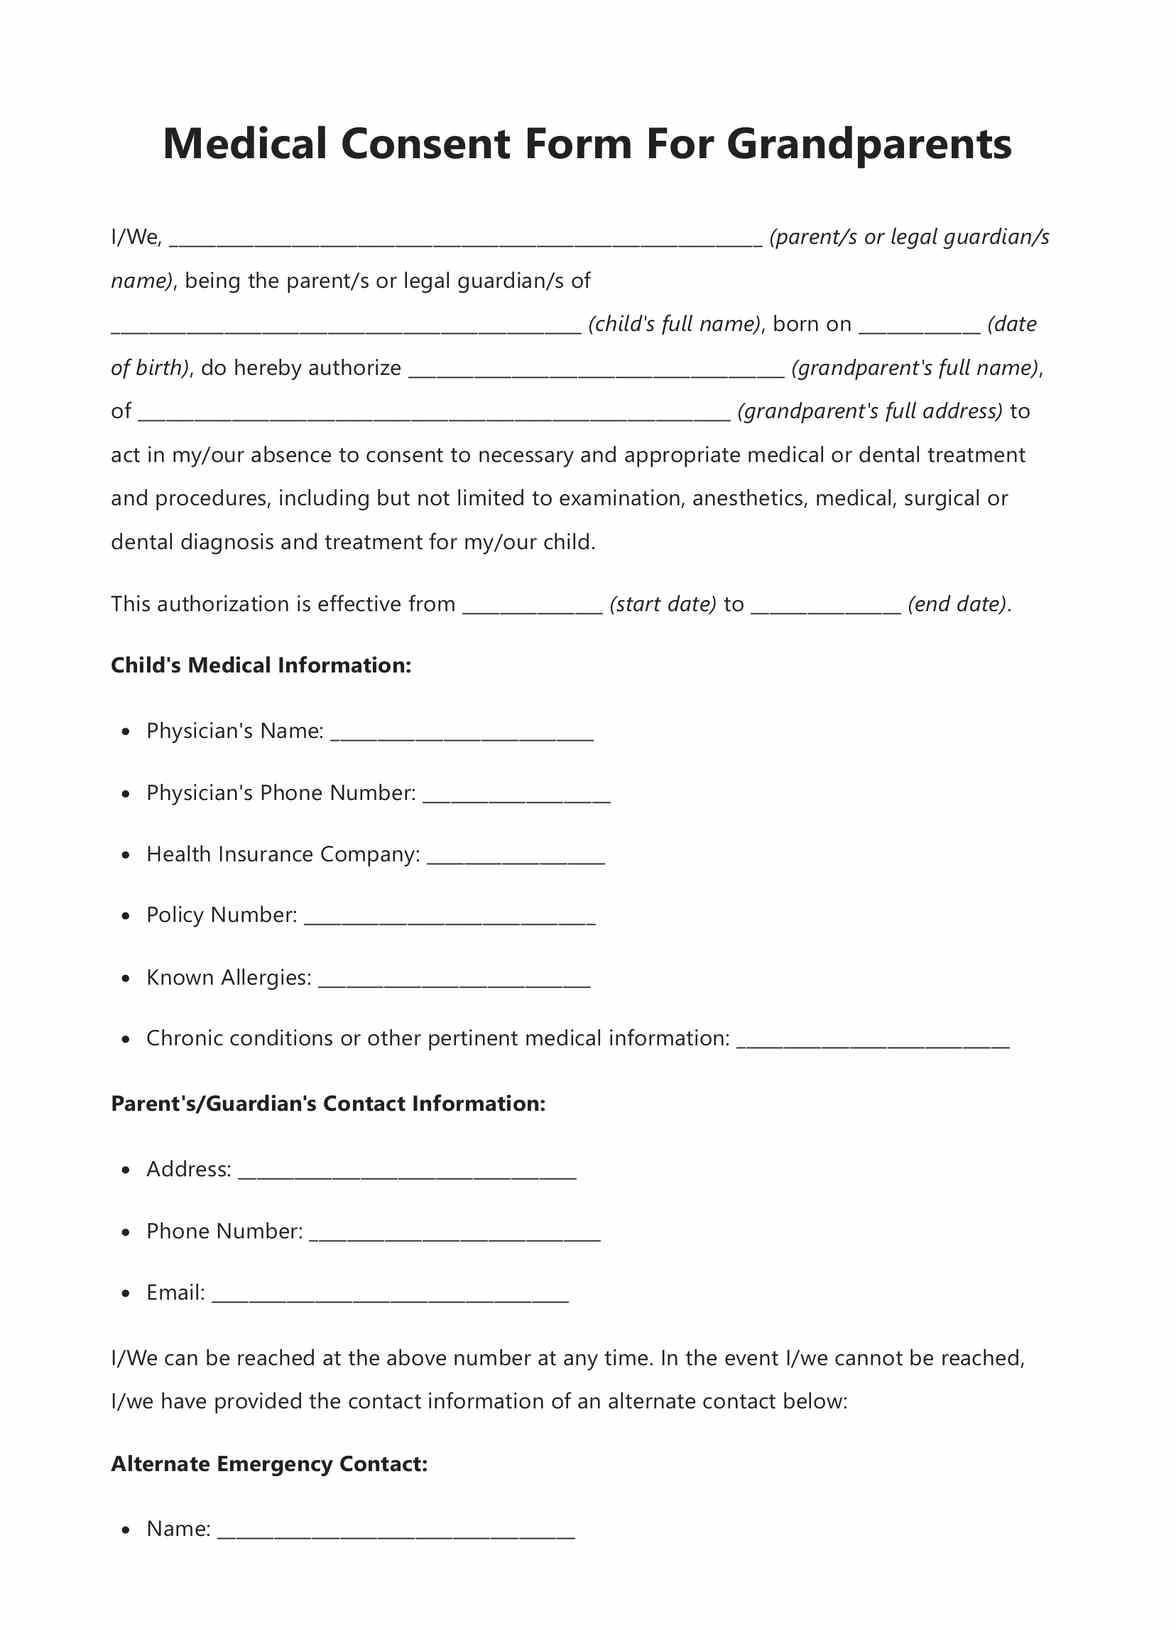 Medical Consent Form For Grandparents PDF Example